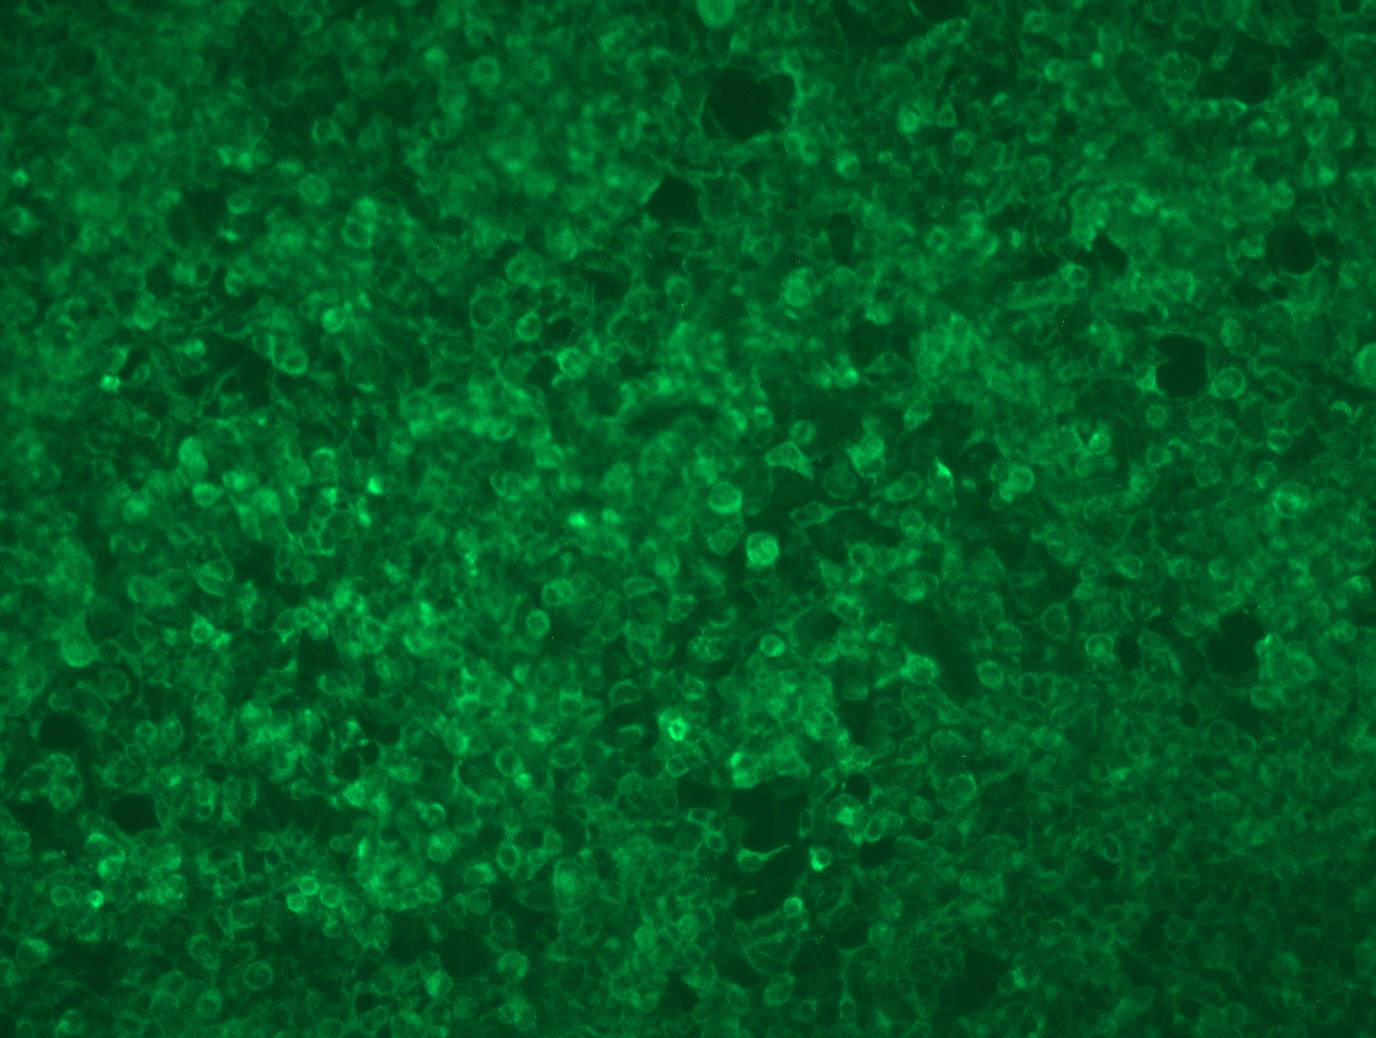 RC203674L3 was used to prepare Lentiviral particles using TR30037 packaging kit. HEK293T cells were transduced with RC203674L3V particle to overexpress human MARC1-Myc-DDK fusion protein.